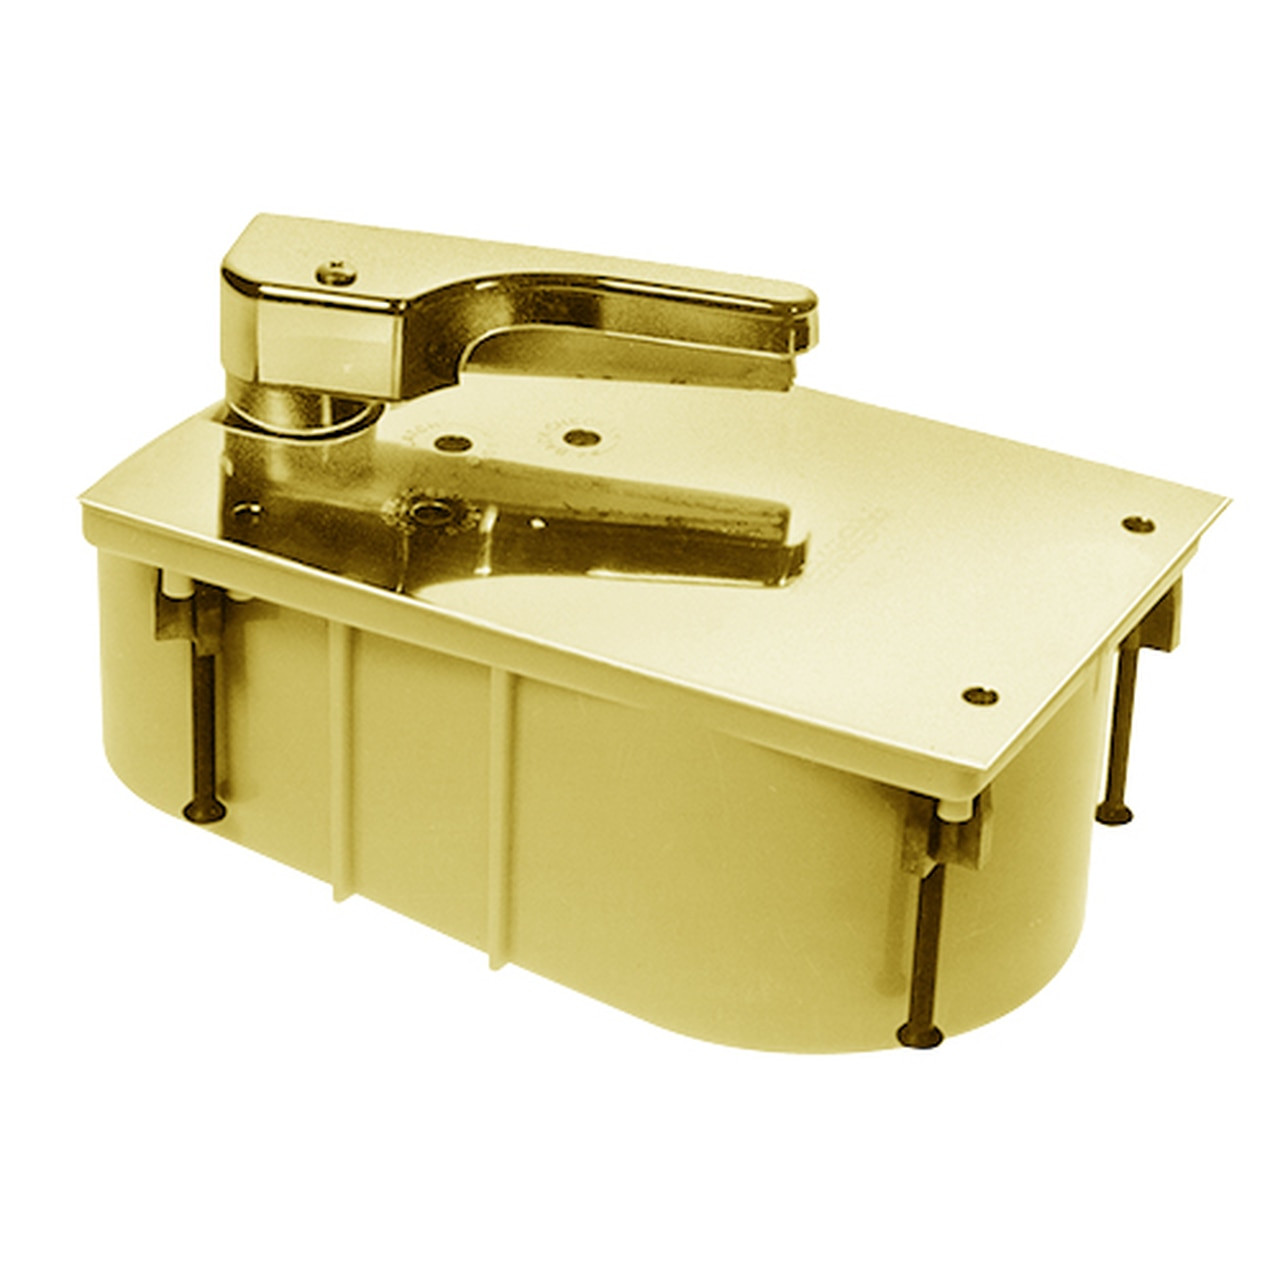 HM27-85N-LFP-LCC-LH-605 Rixson 27 Series Heavy Duty Offset Hung Floor Closer with HM Door and Frame Preps in Bright Brass Finish